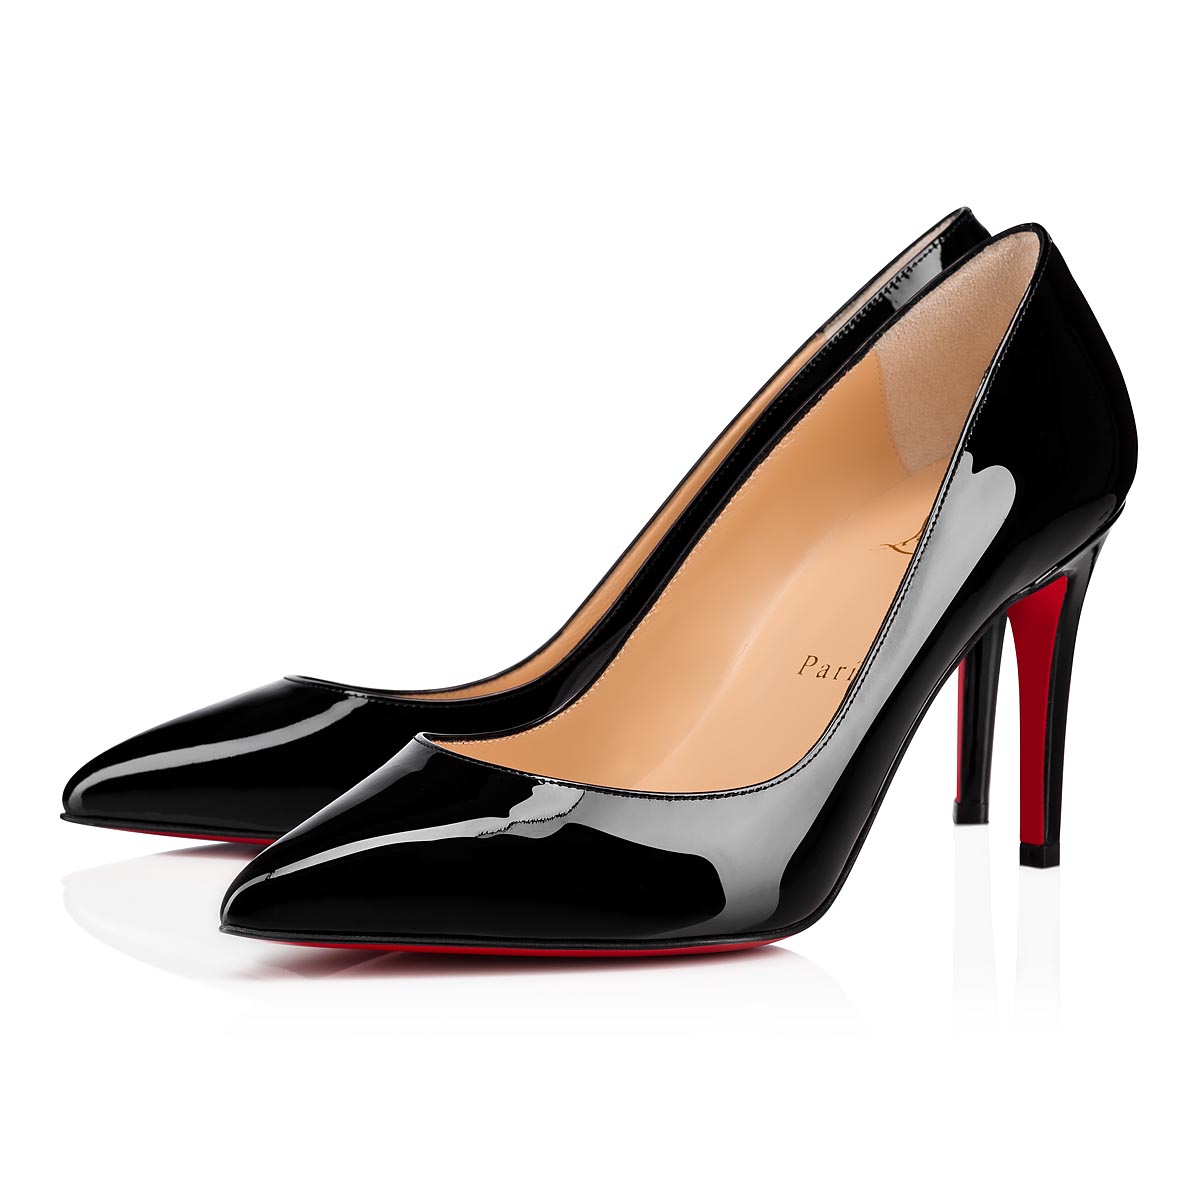 Christian Louboutin, Pigalle 85 Black Patent Leather Pumps